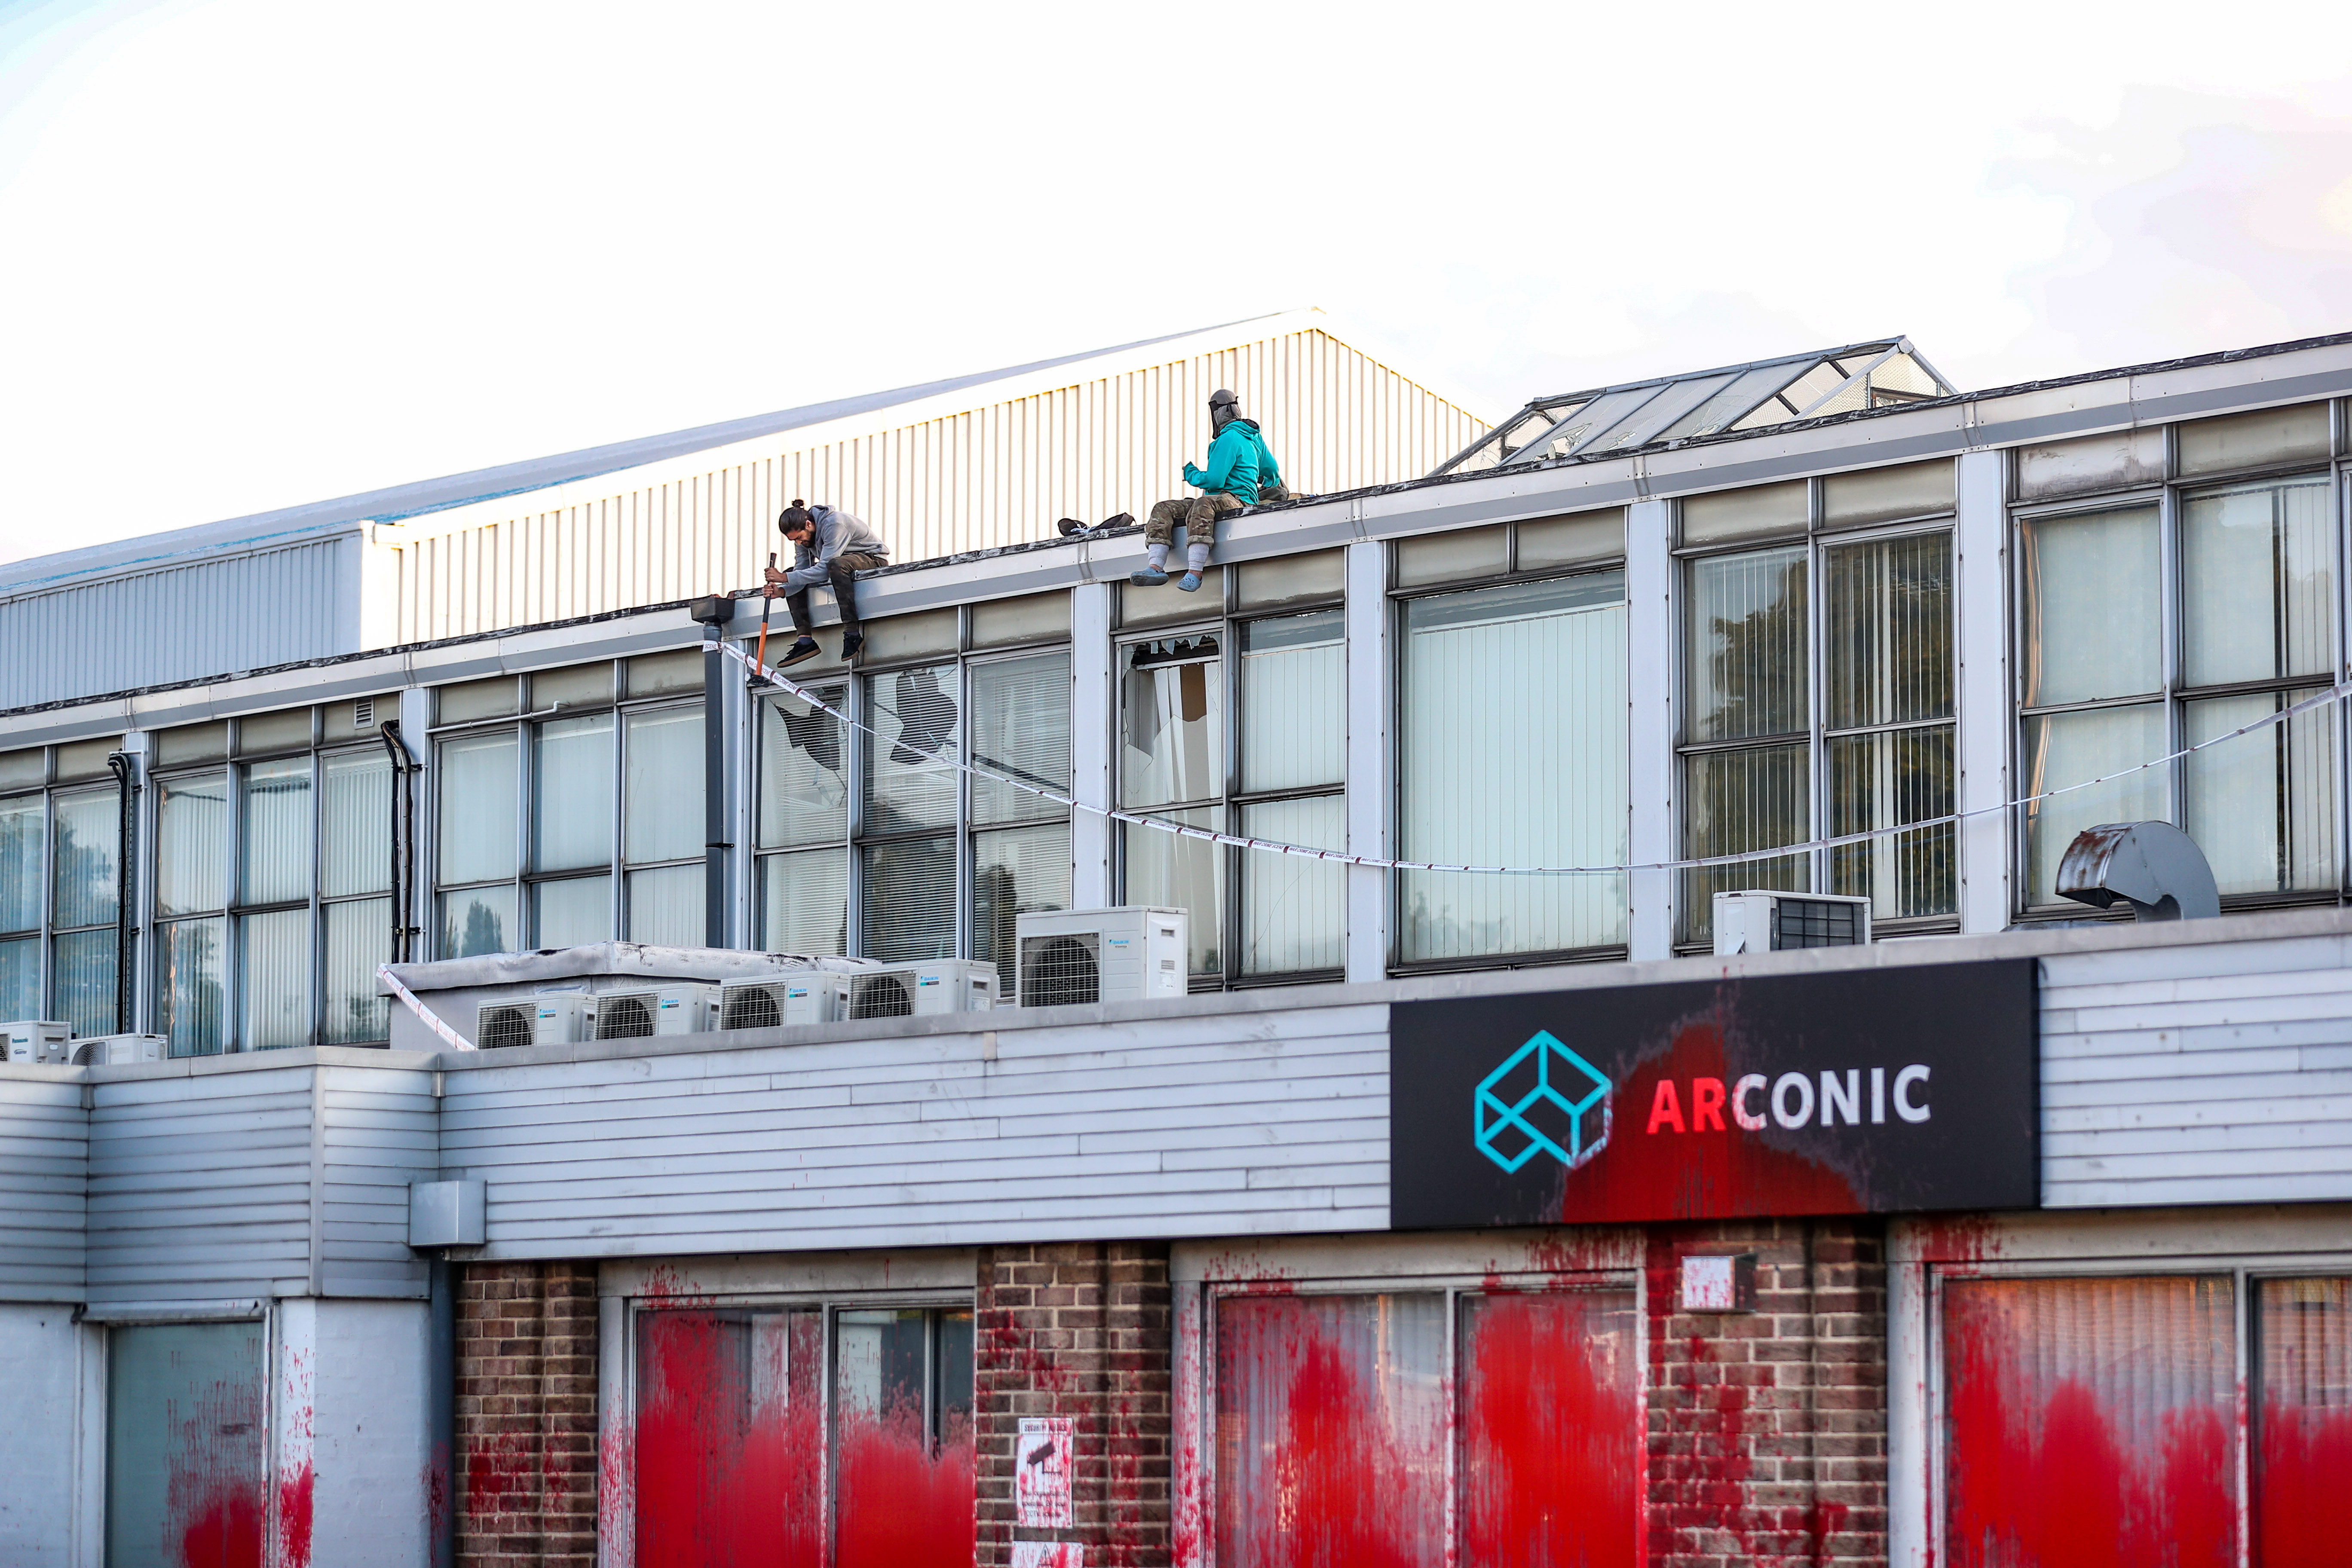 Palestine Action activists scaled the Arconic Factory in Birmingham to stop its operations (Supplied: Palestine Action)